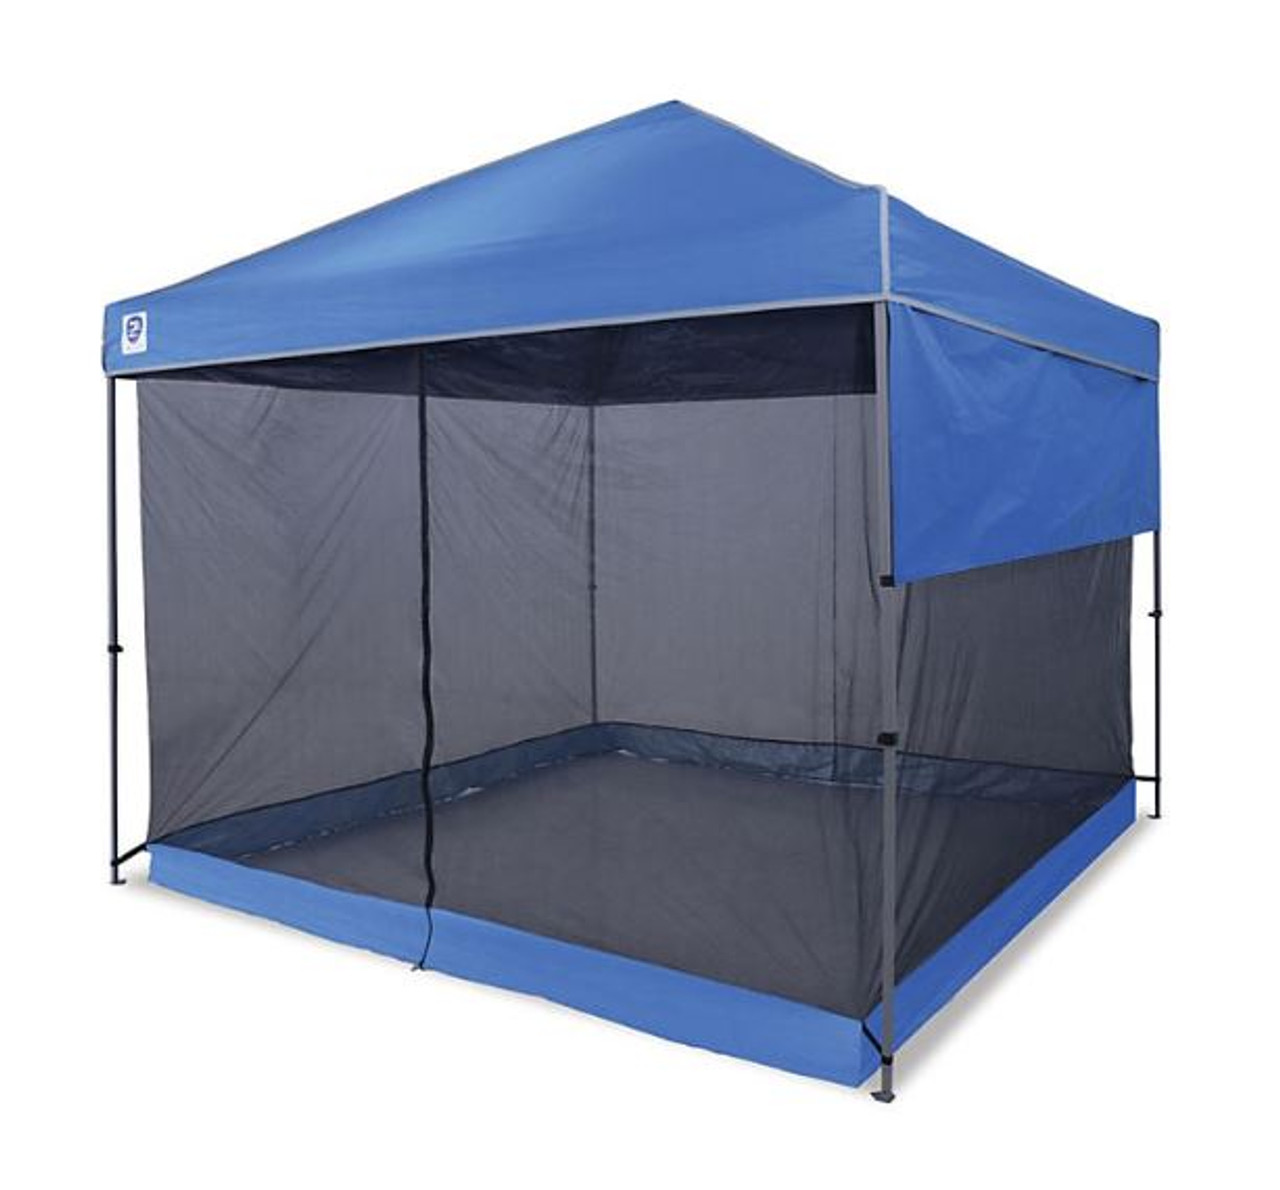 Z-Shade Blast 10' x 10' Instant Canopy Value Pack